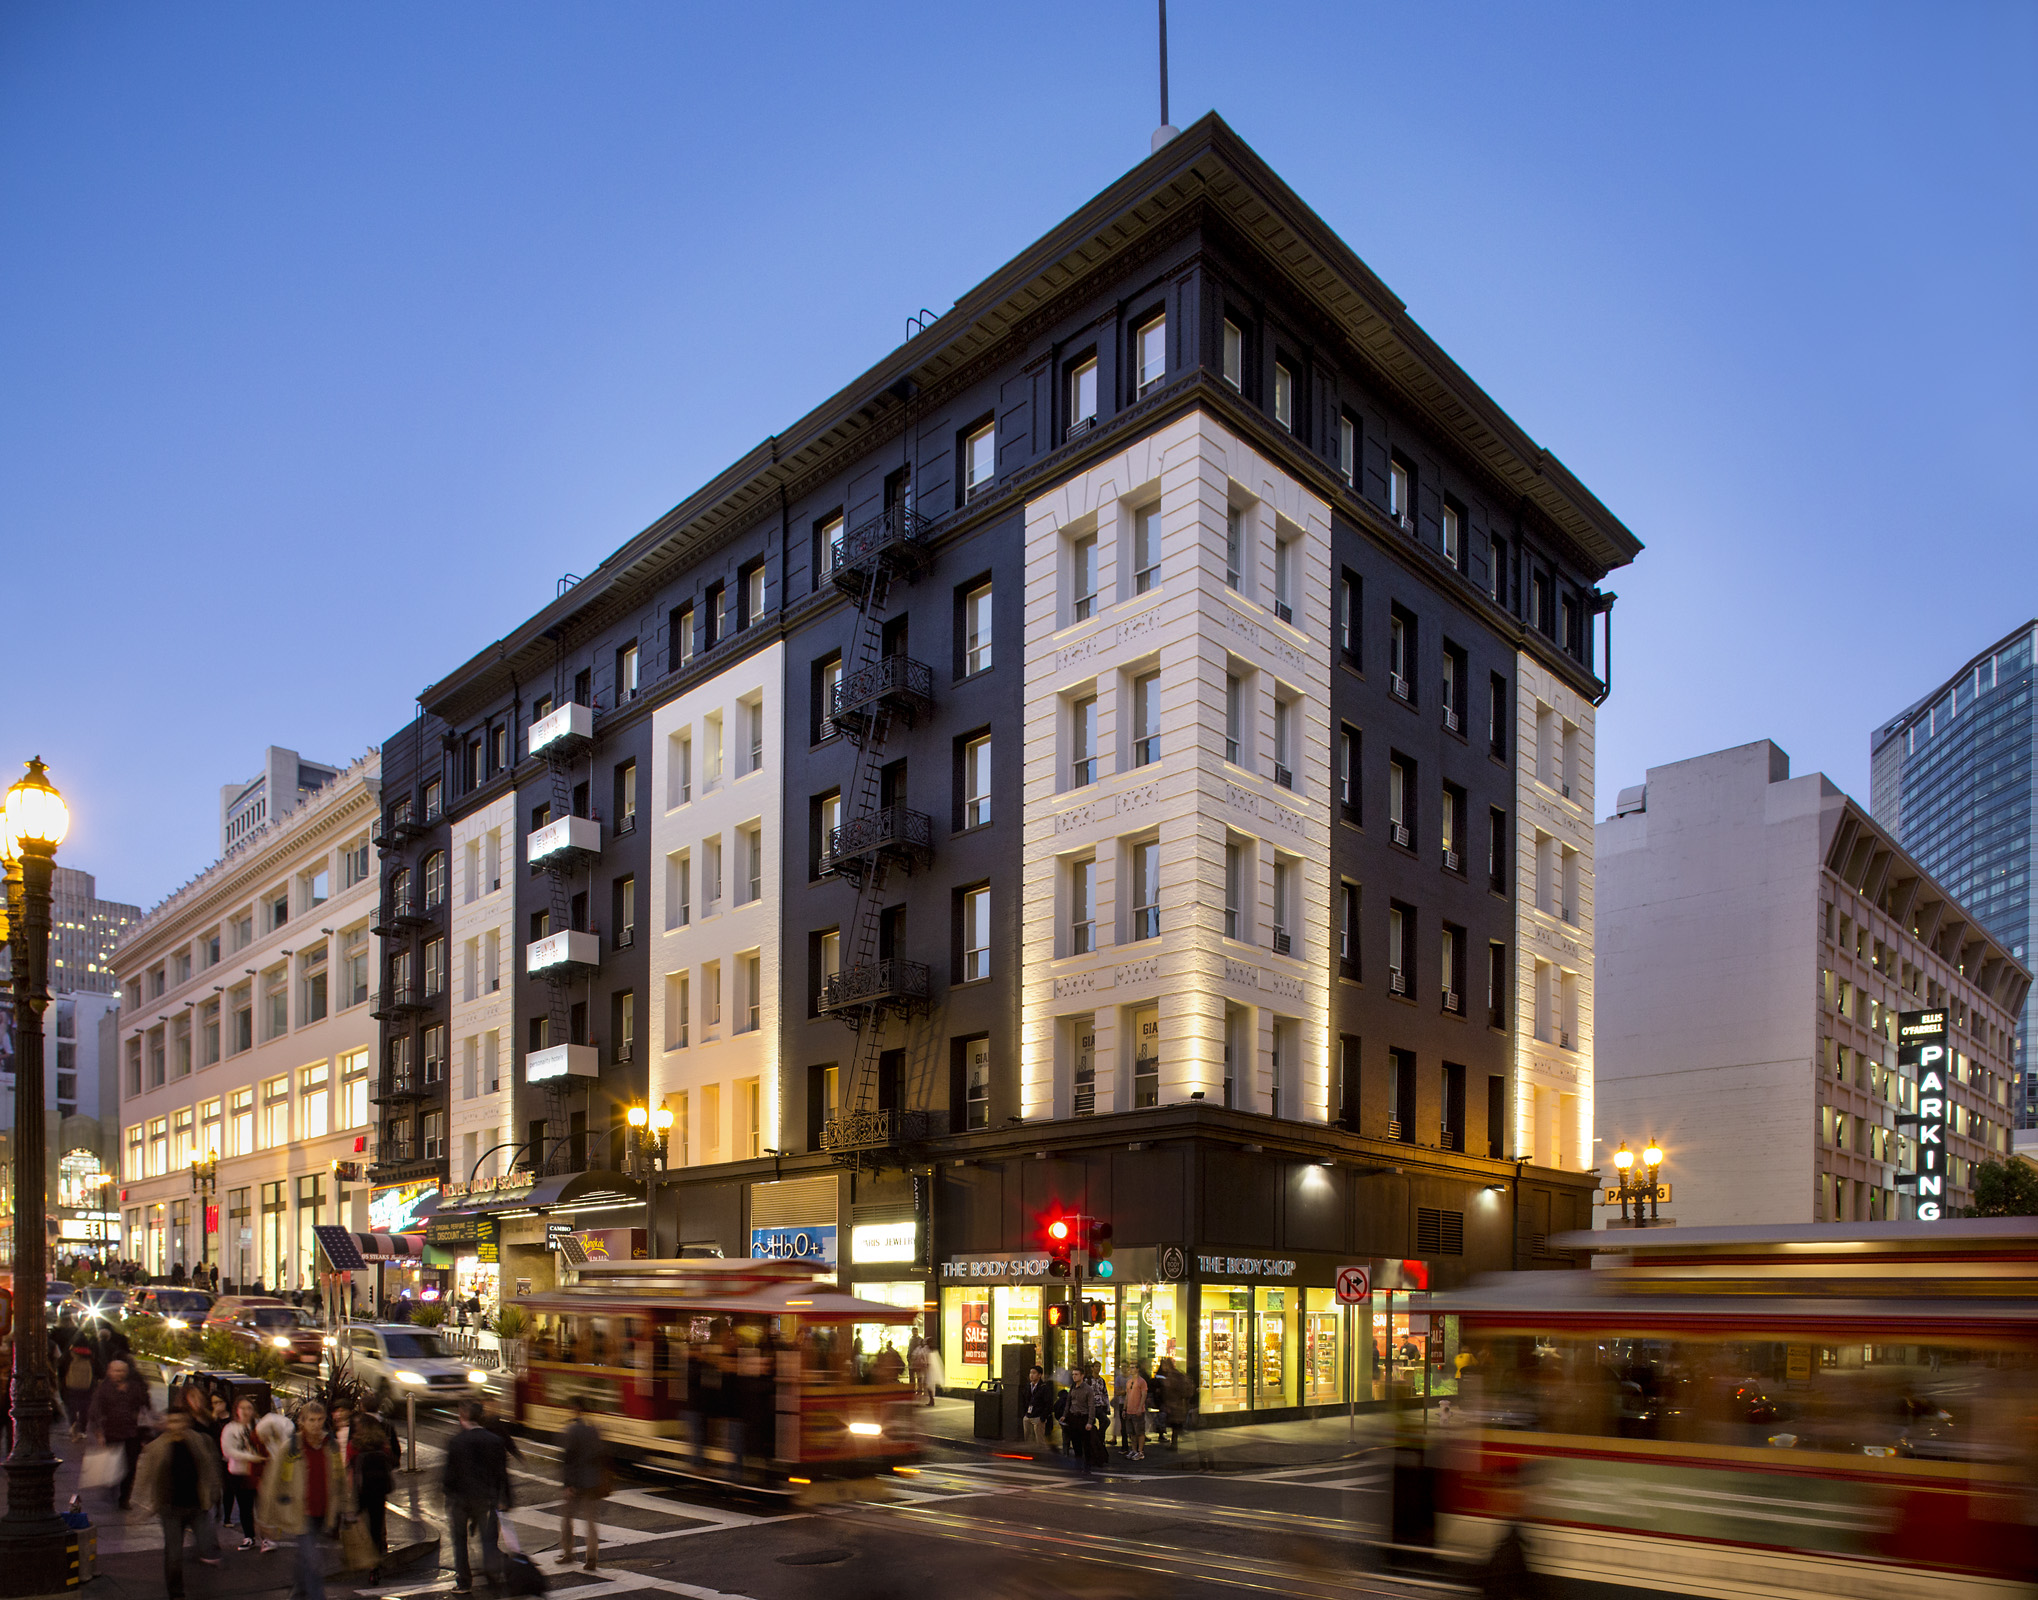 Hotel Union Square is an ideally-located San Francisco Hotel.